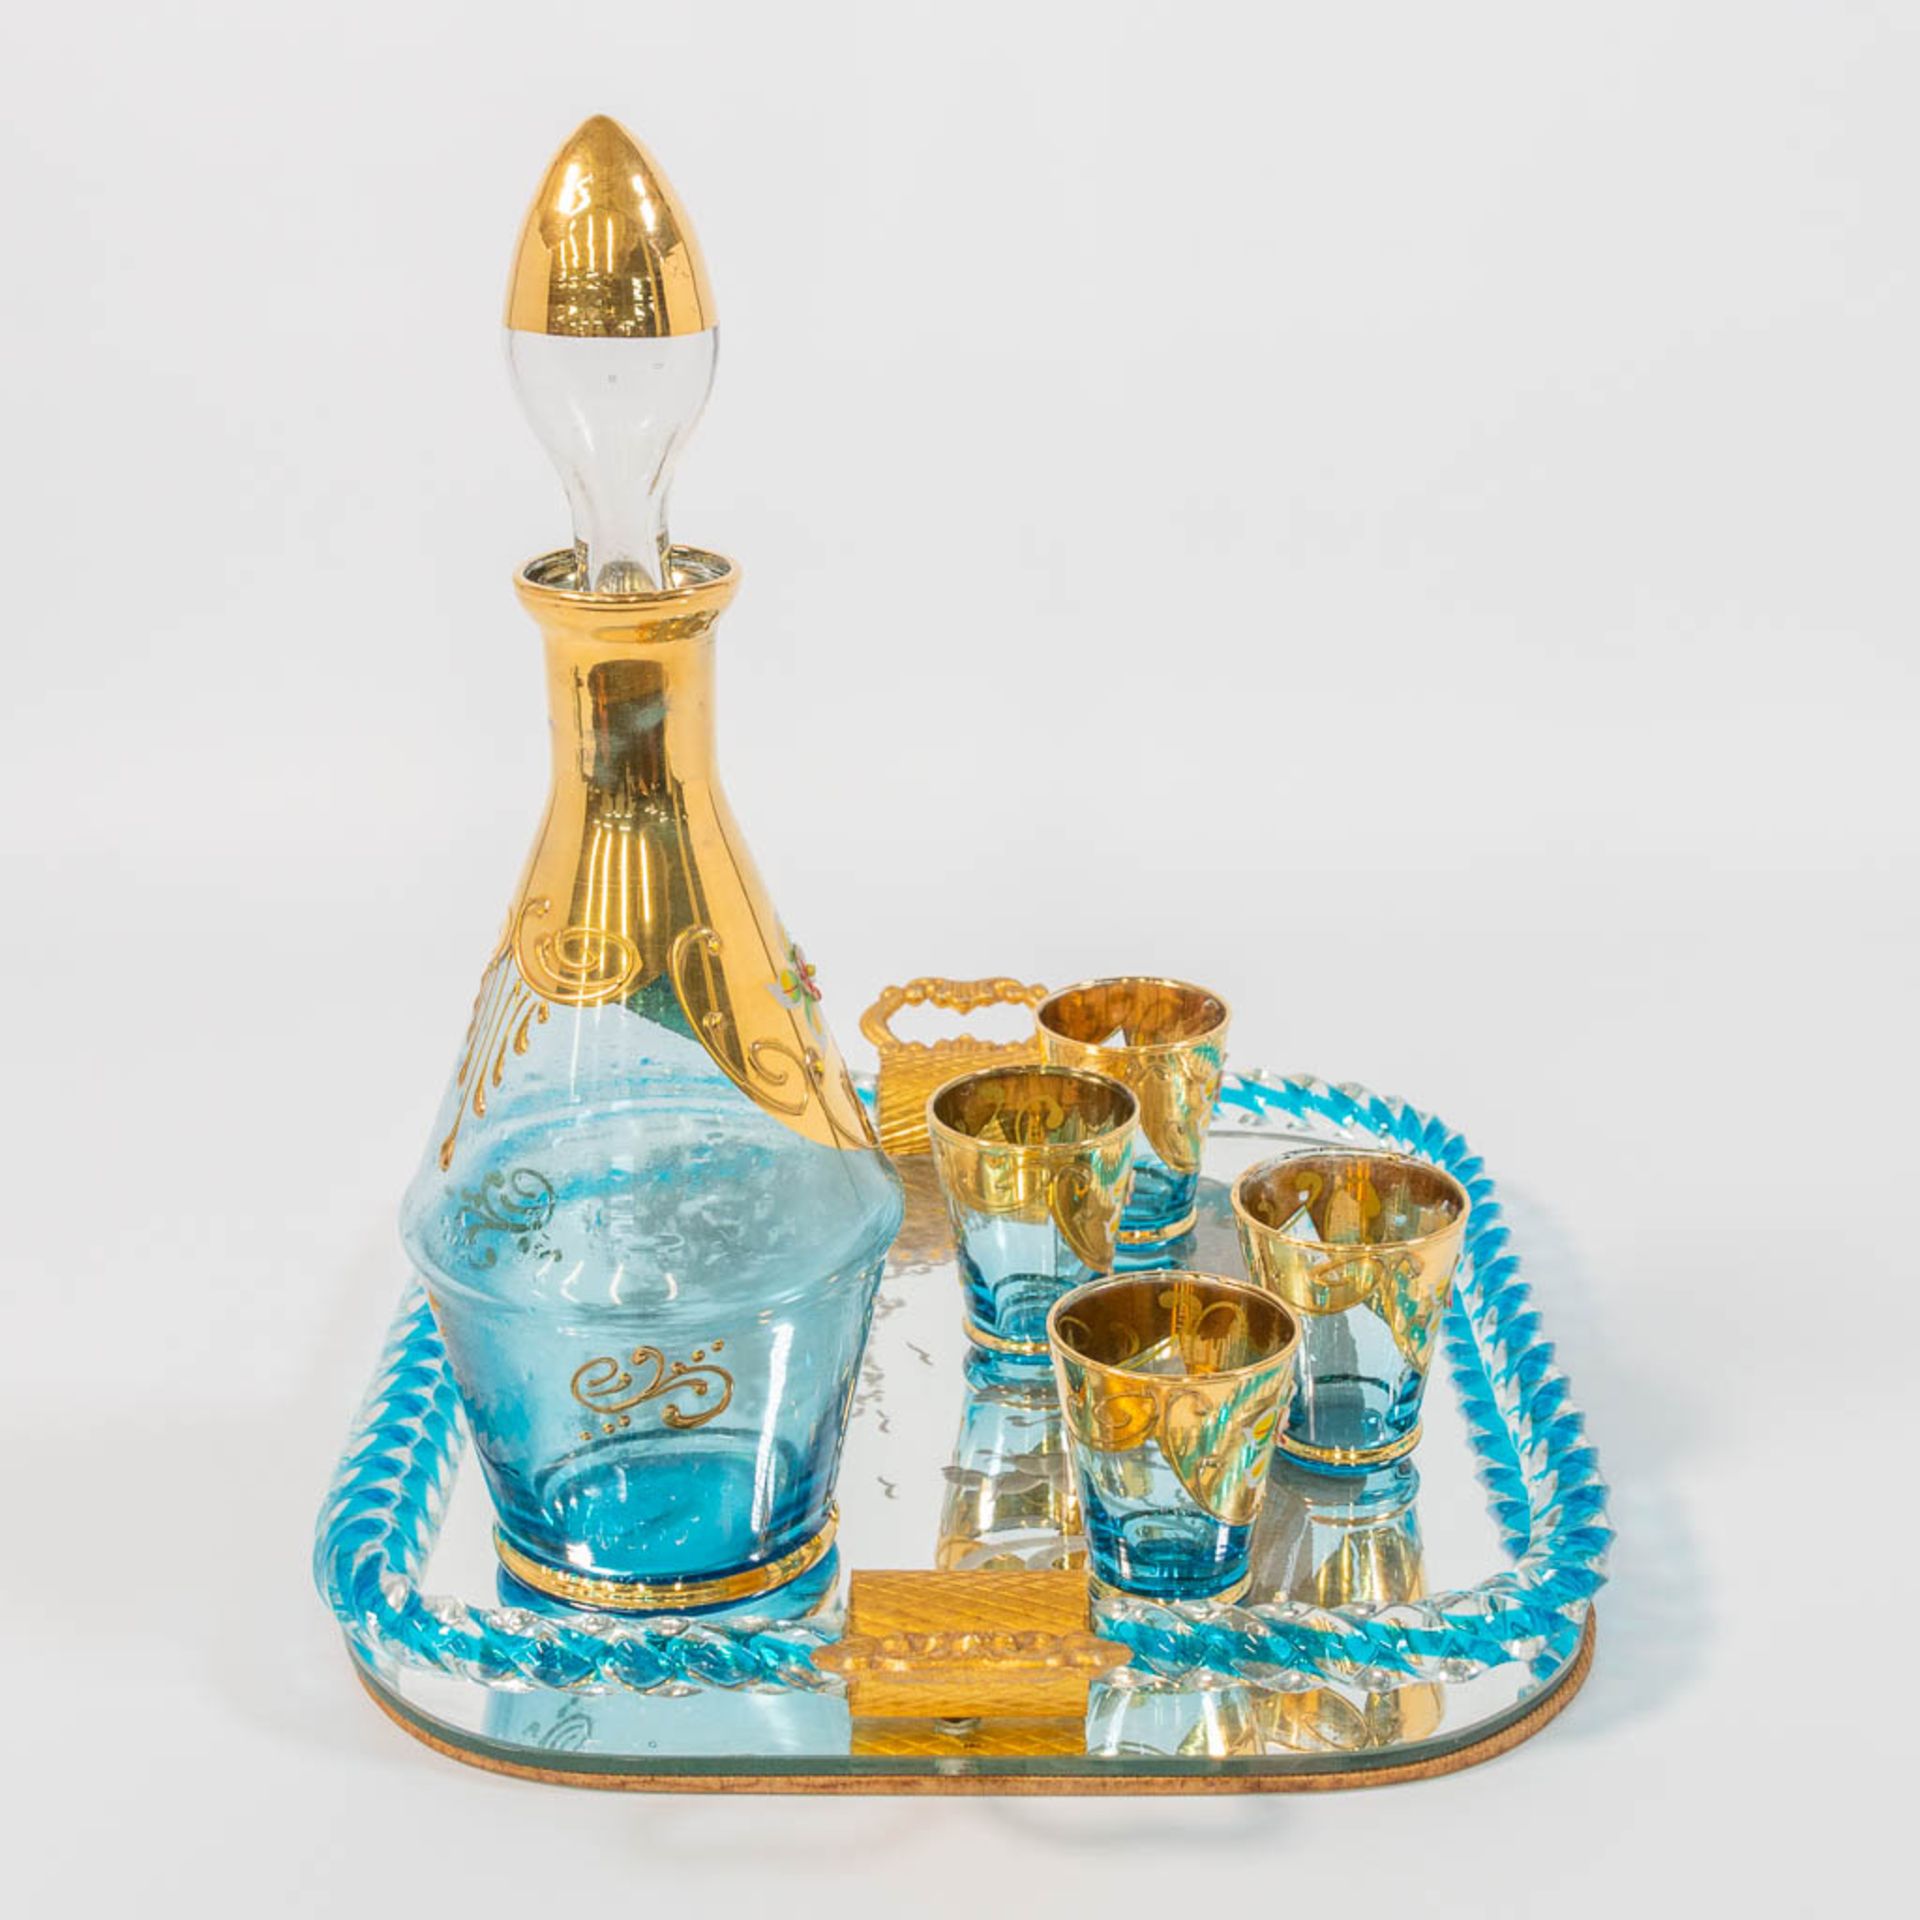 A decanter, glasses, and tray with gold painted flowers and etched decor. - Image 7 of 20